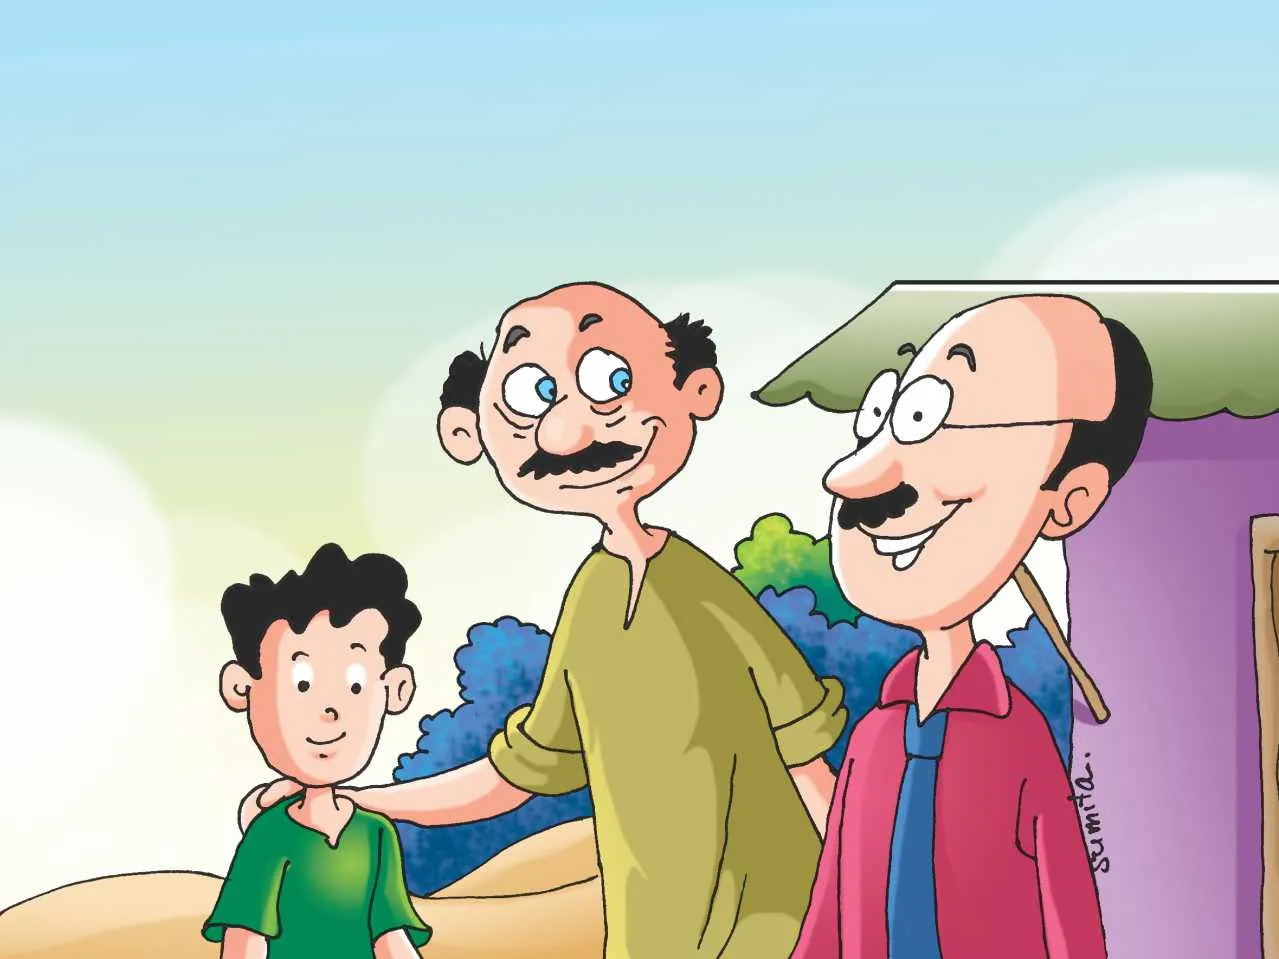 Two Man with a kid cartoon image